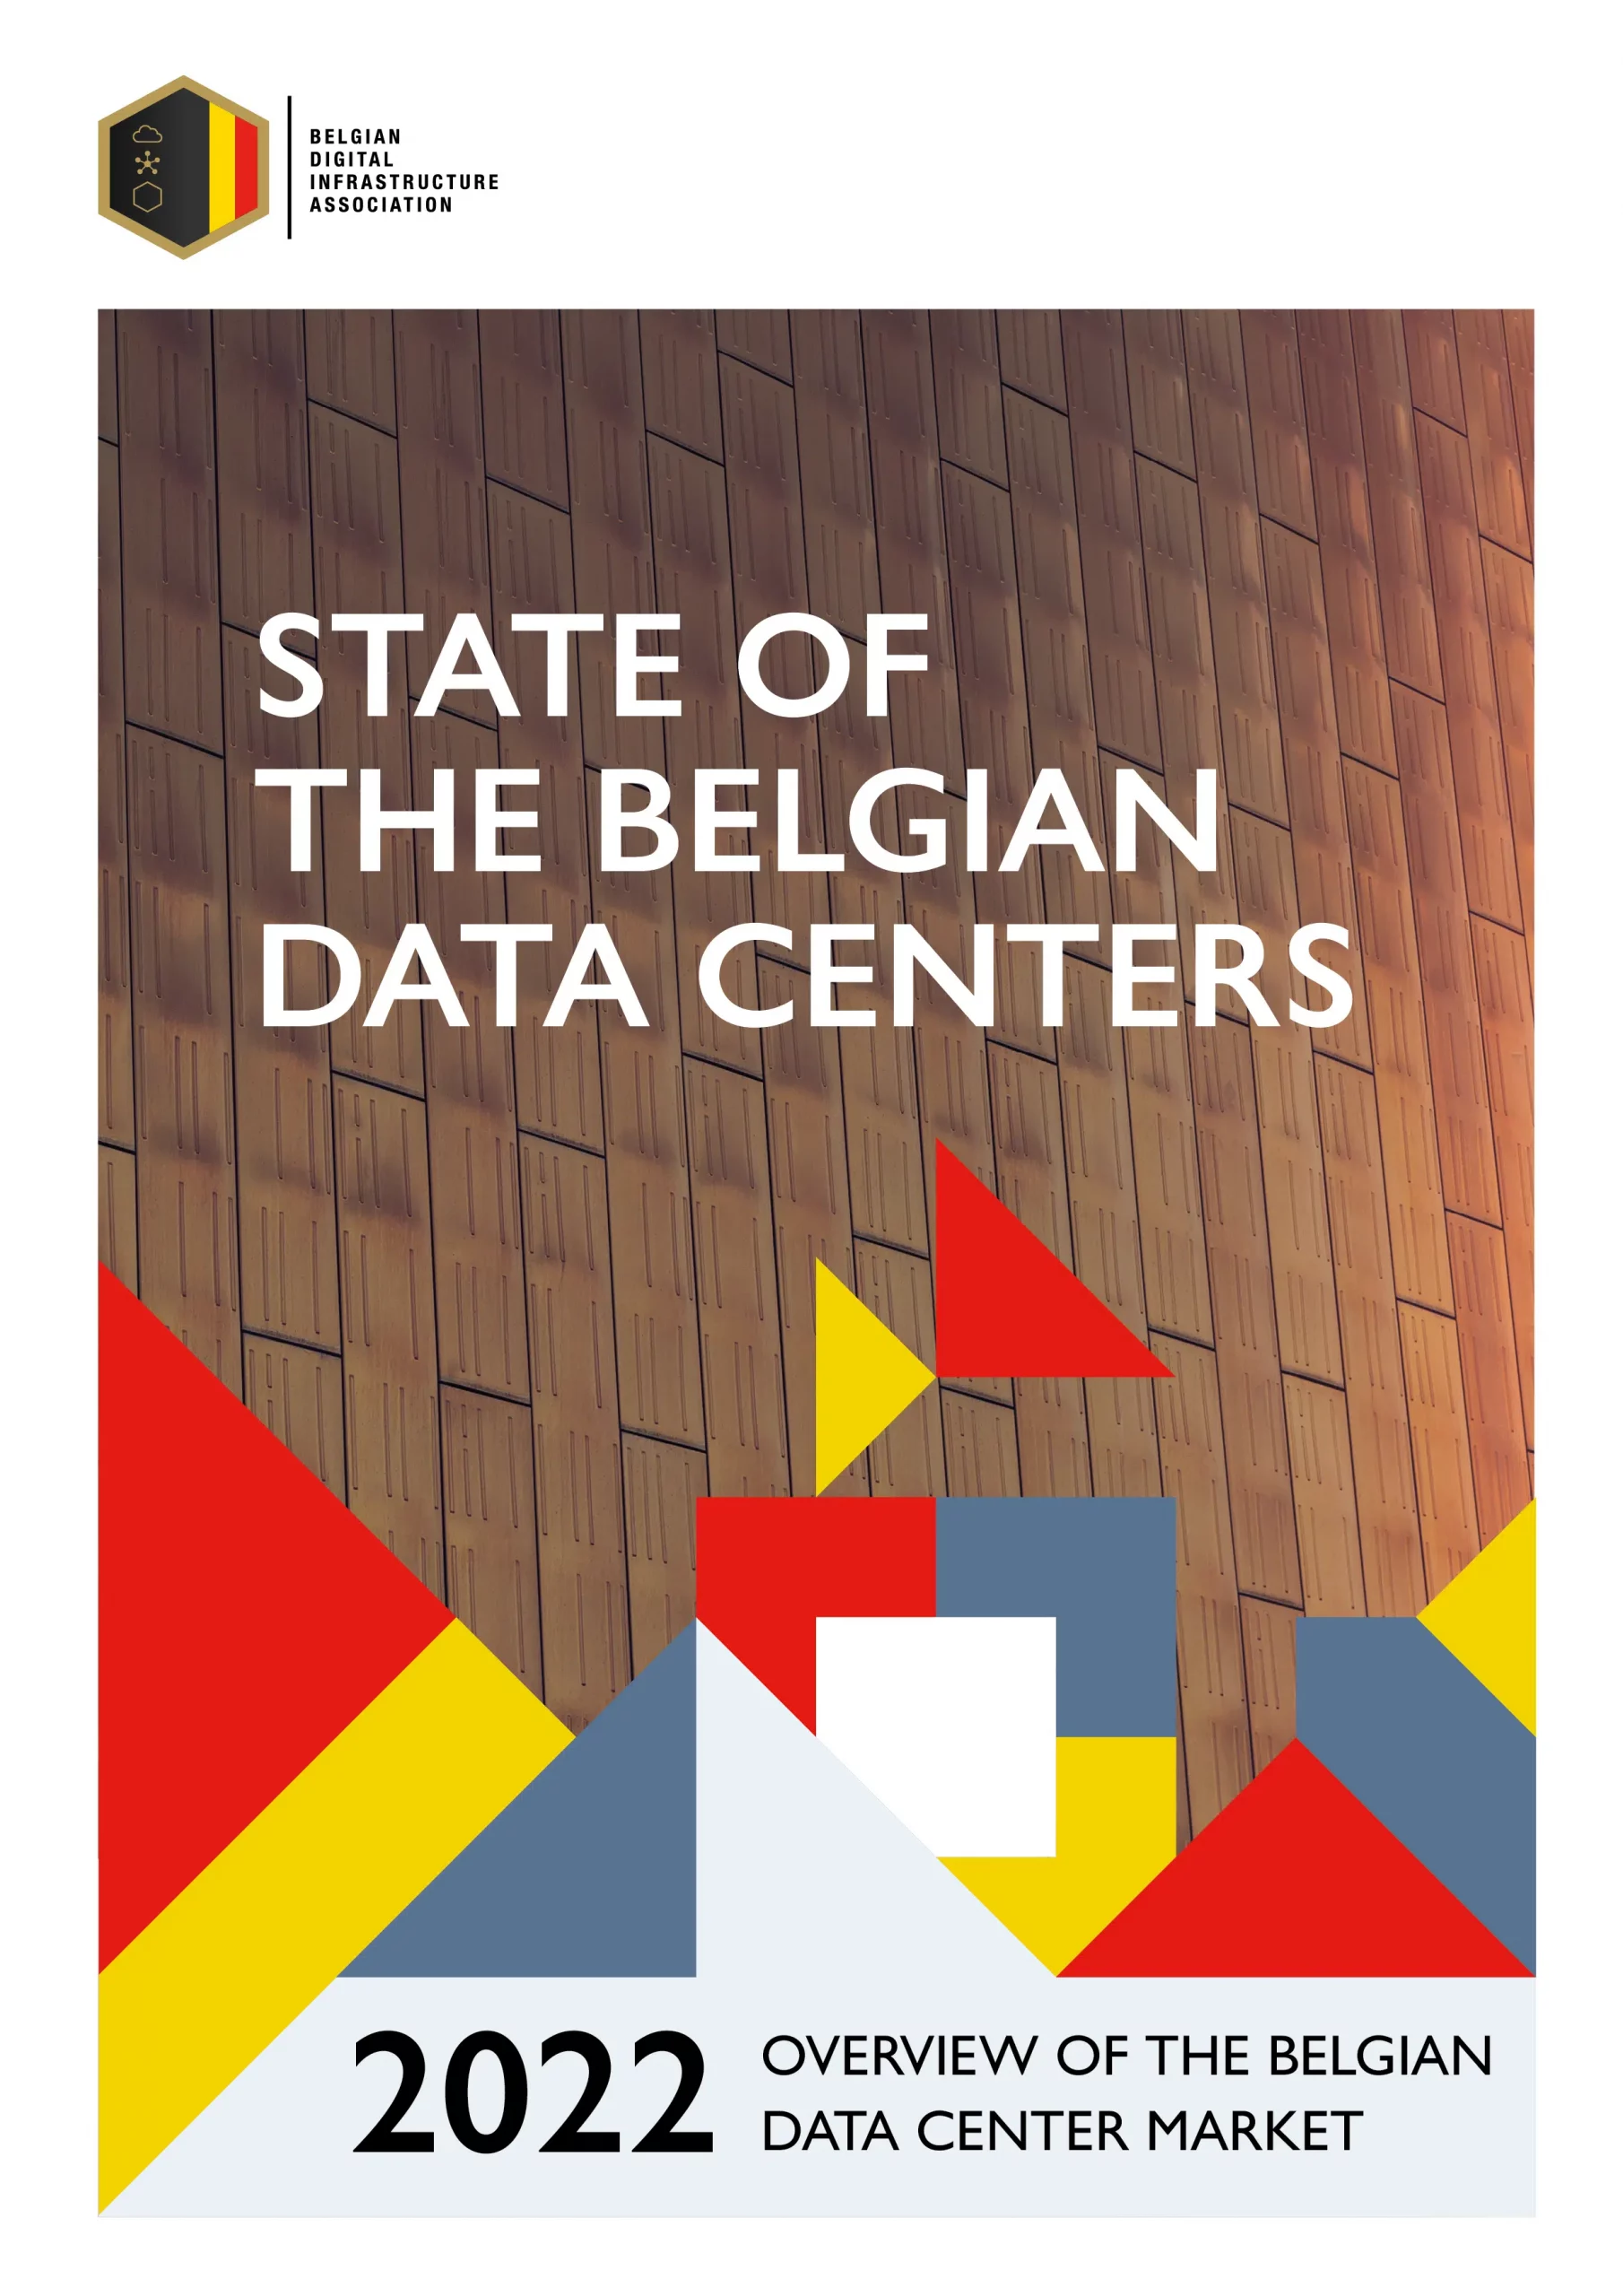 Report | BDIA publishes State of the Belgian Data Centers 2022